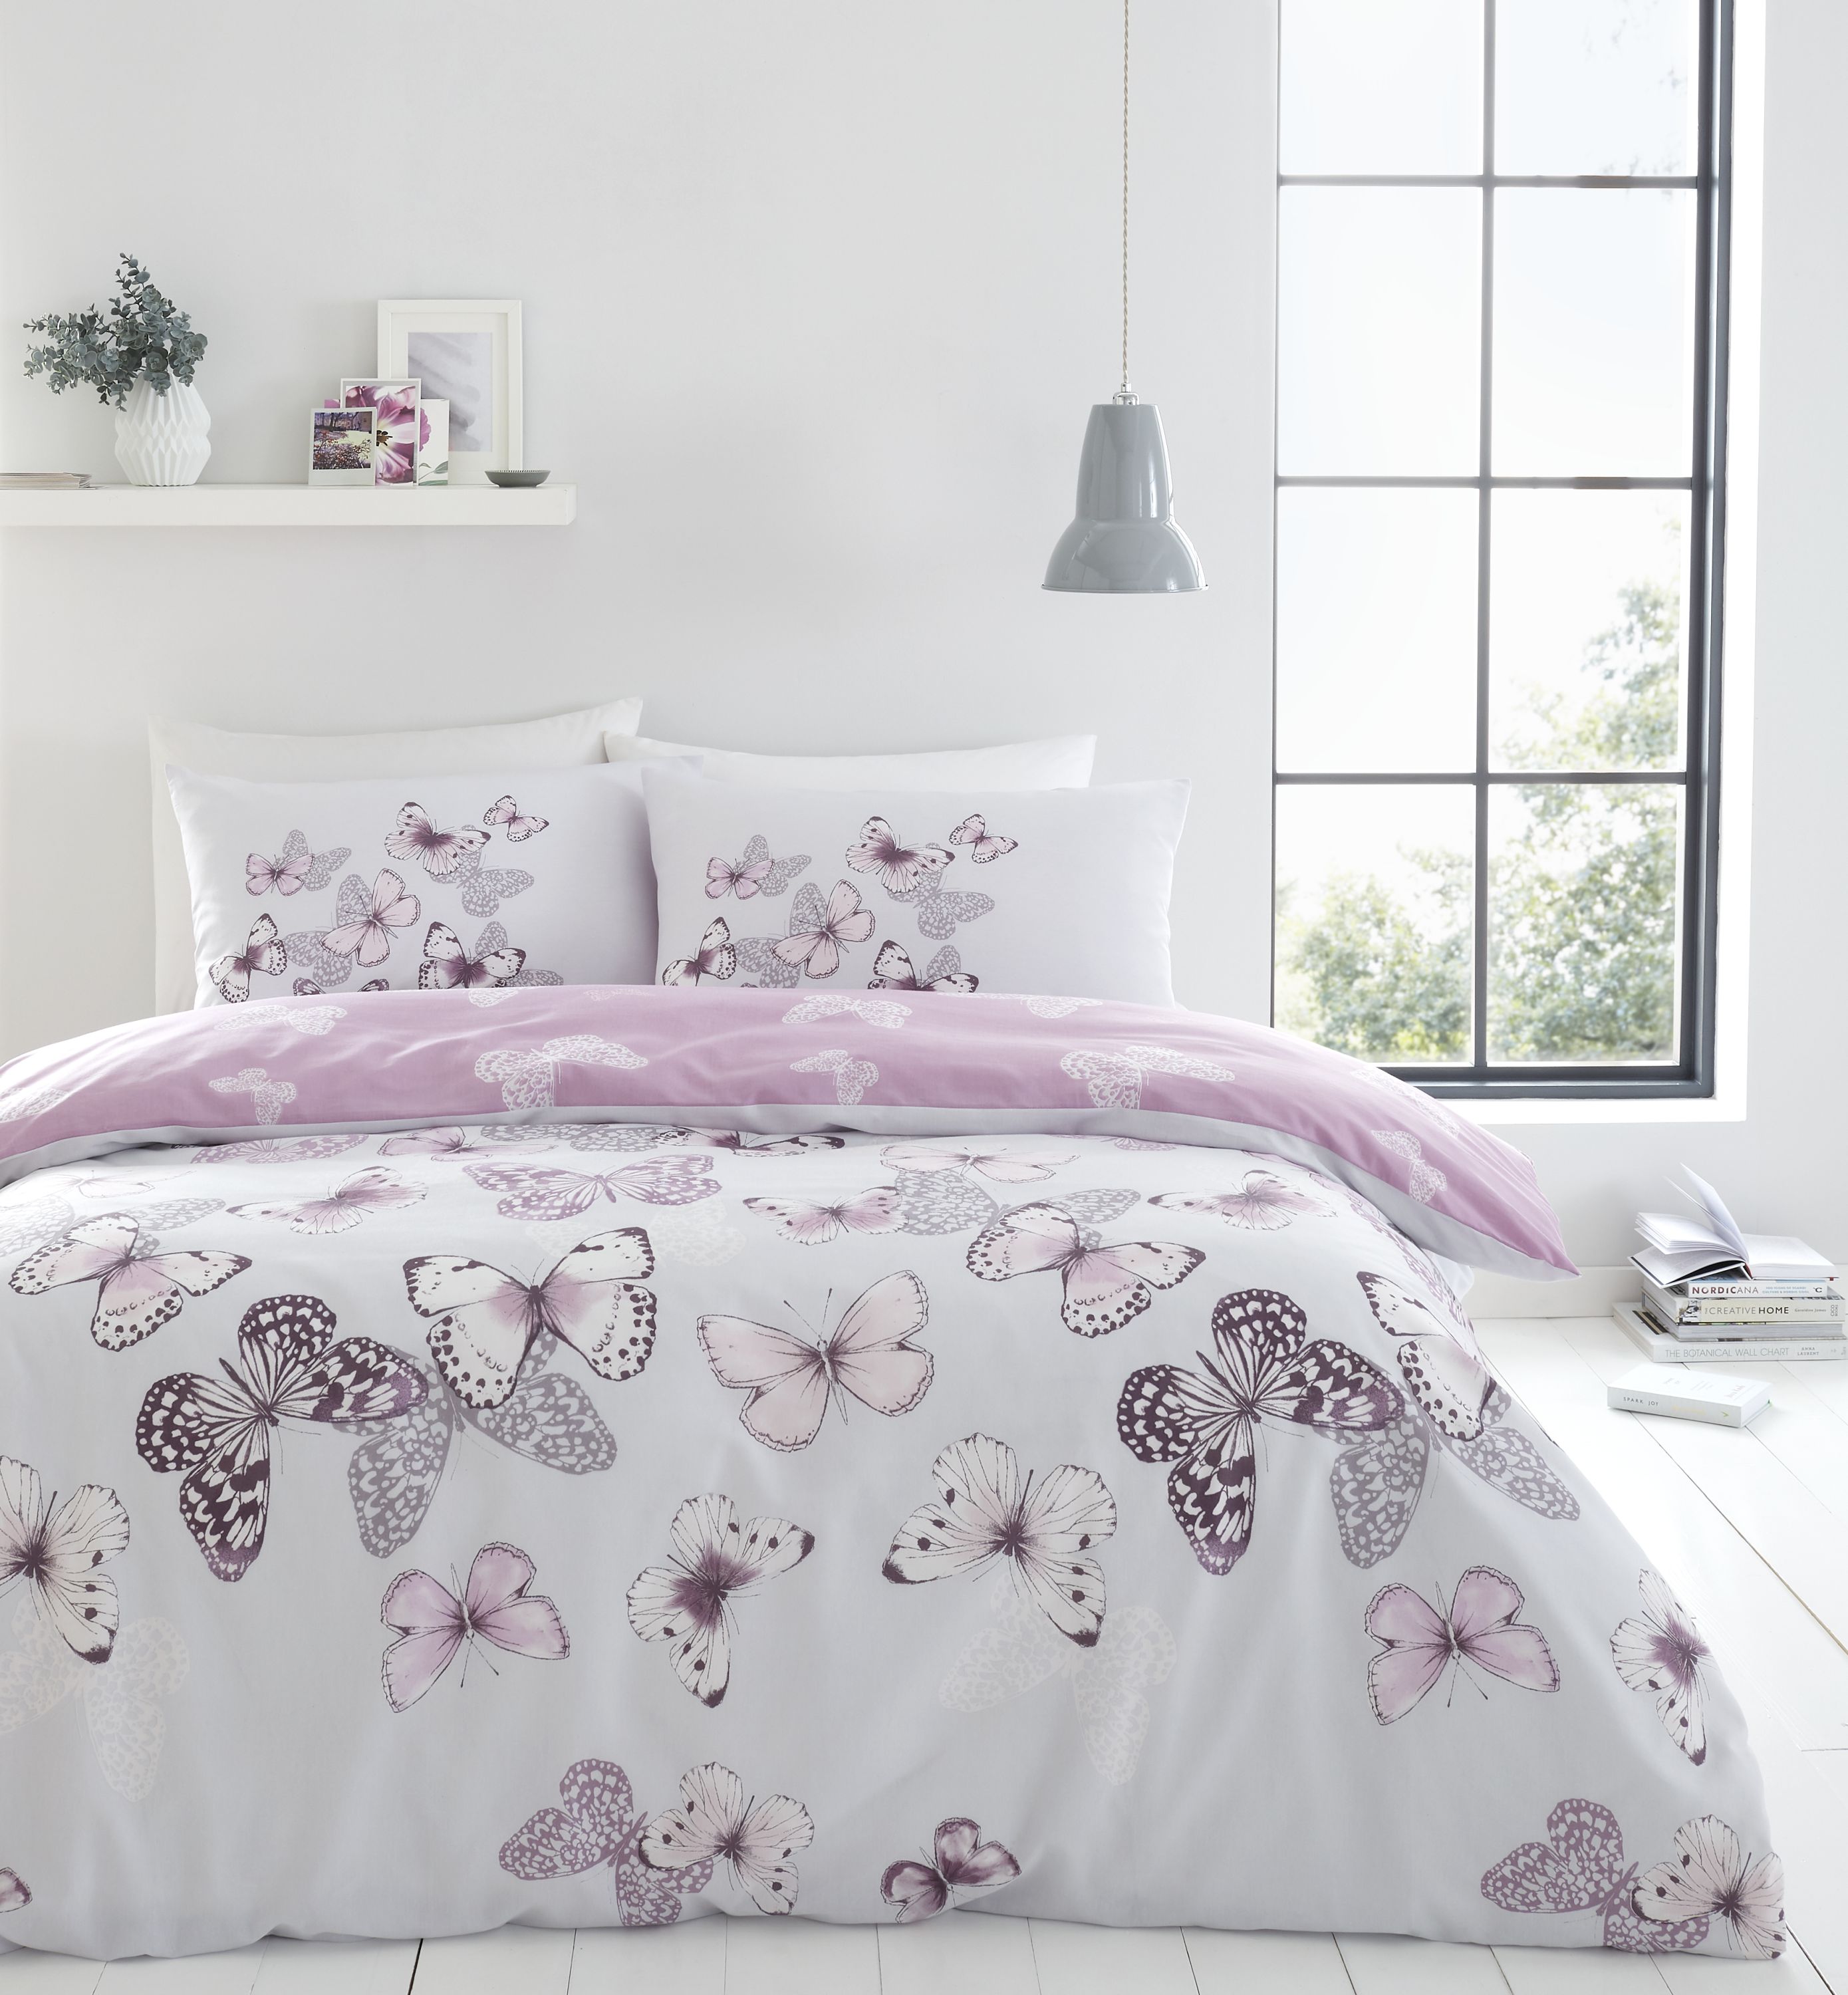 Catherine Lansfield Bedding Sets, Duvet Covers & Pillowcases